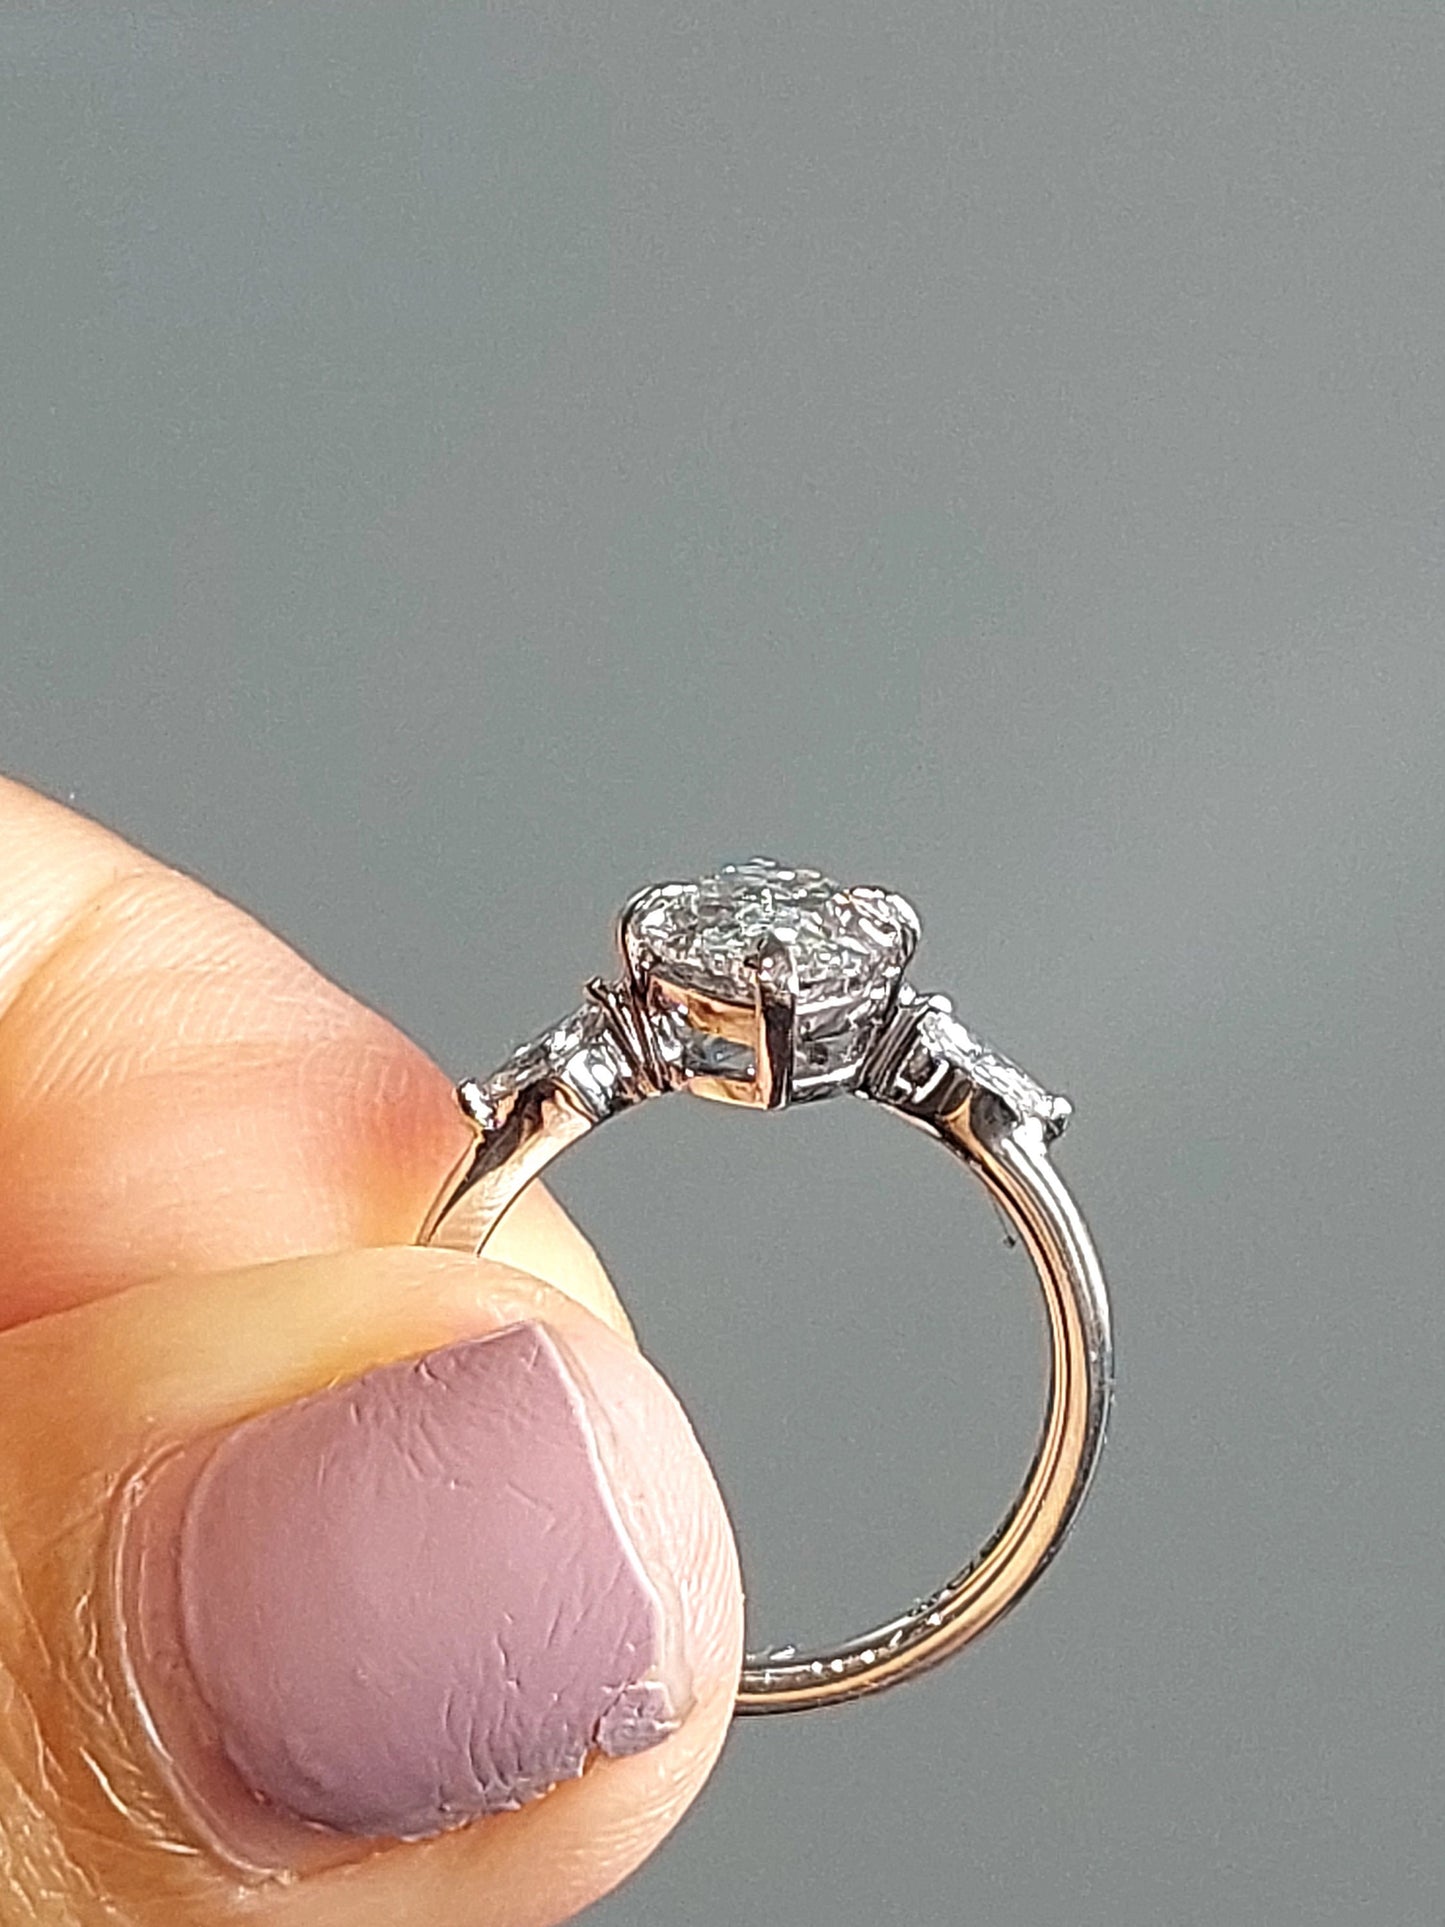 1.5 Ct Marquise Diamond Vintage Ring, Lab Grown Diamond Ring, IGI CERTIFIED, Yellow gold Custom made ring, Unique Engagement Ring.